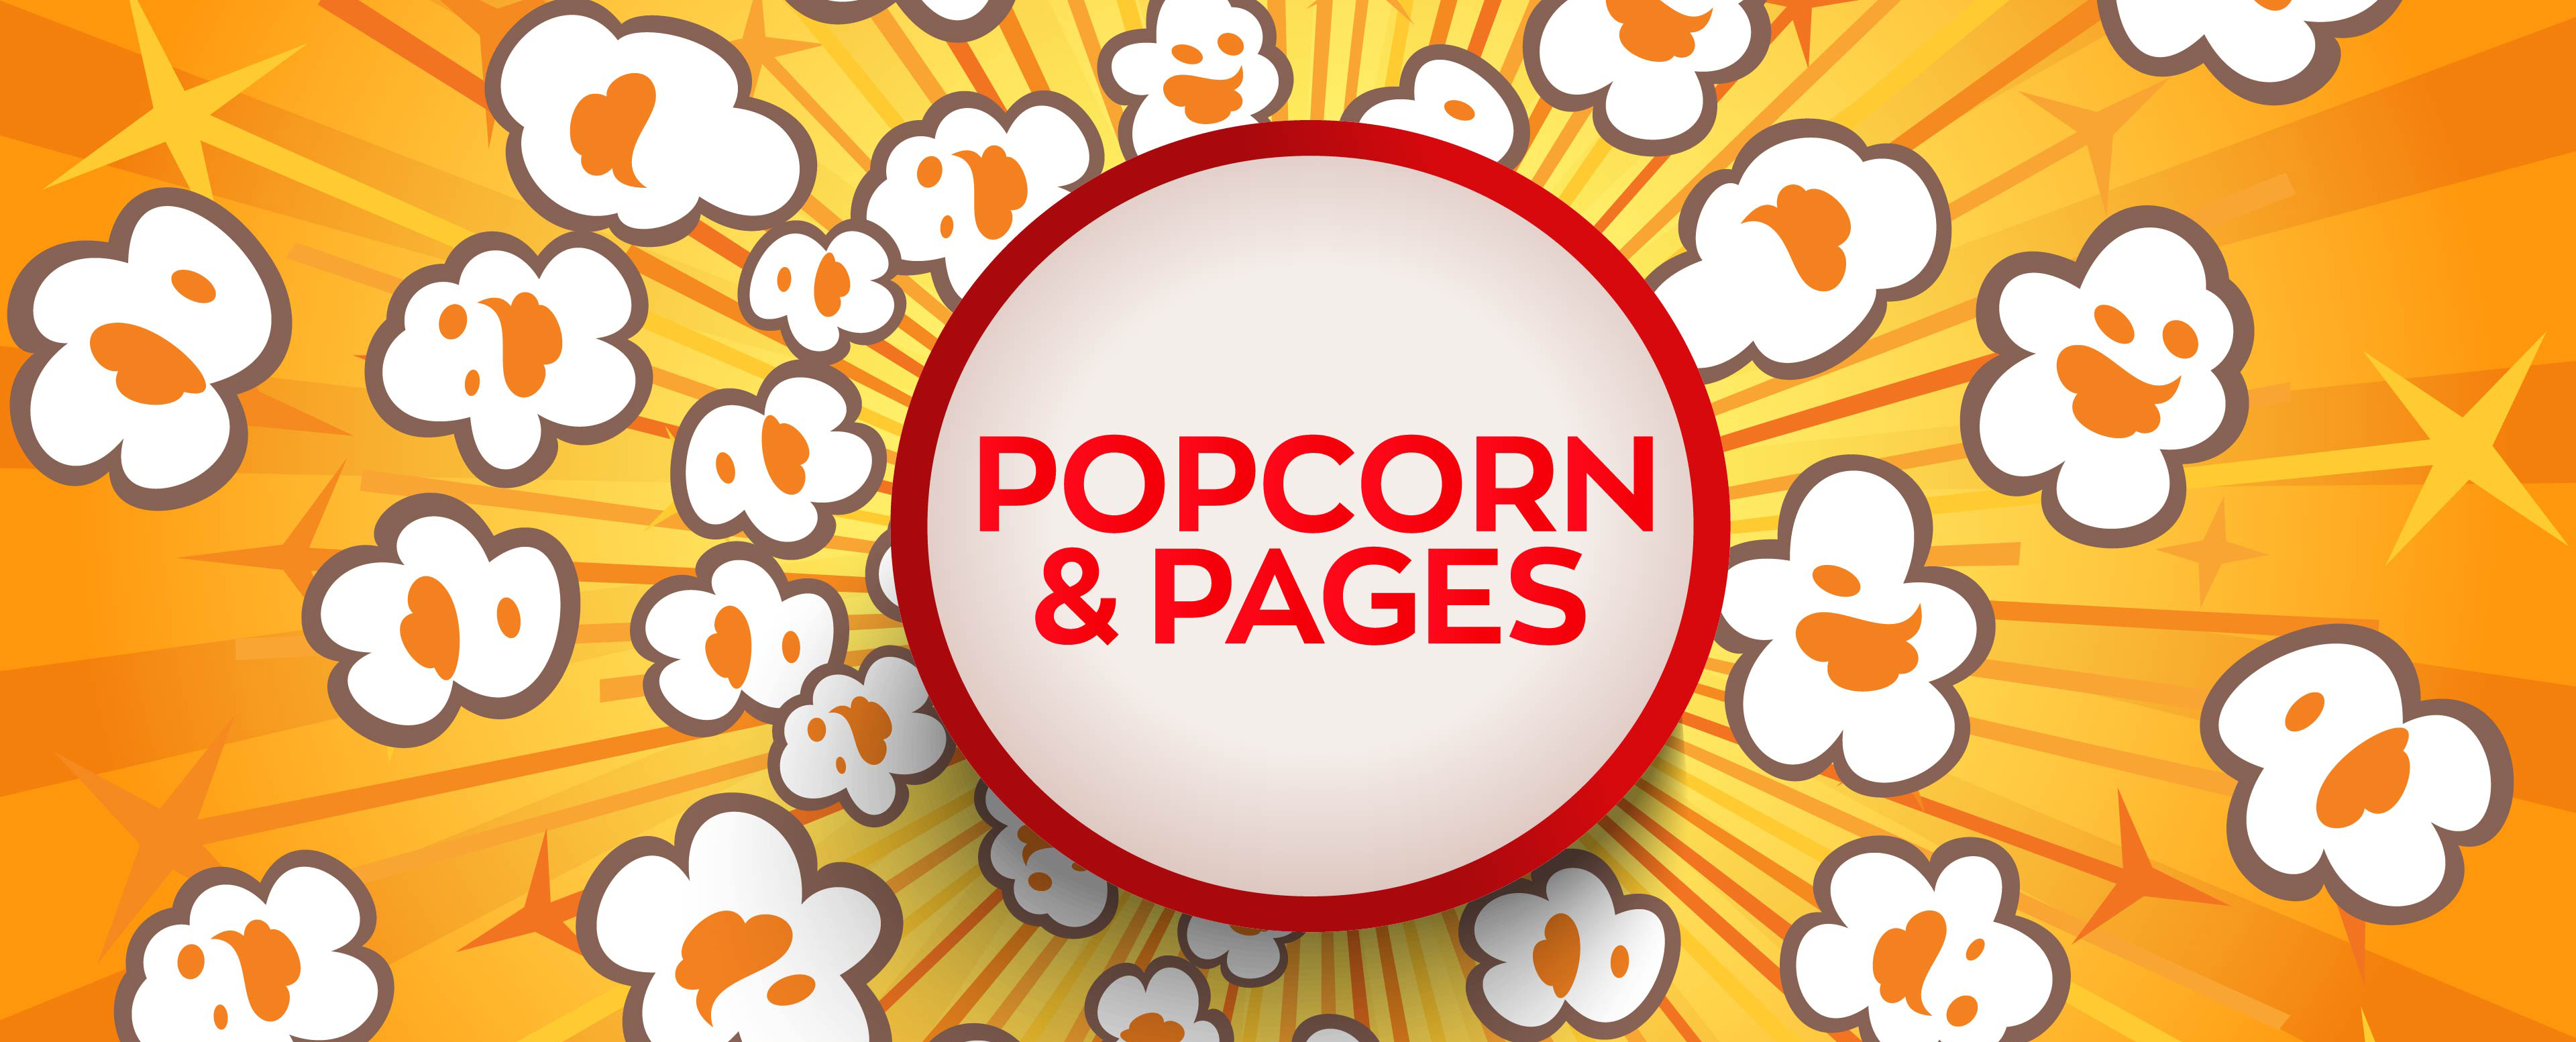 Popcorn & Pages